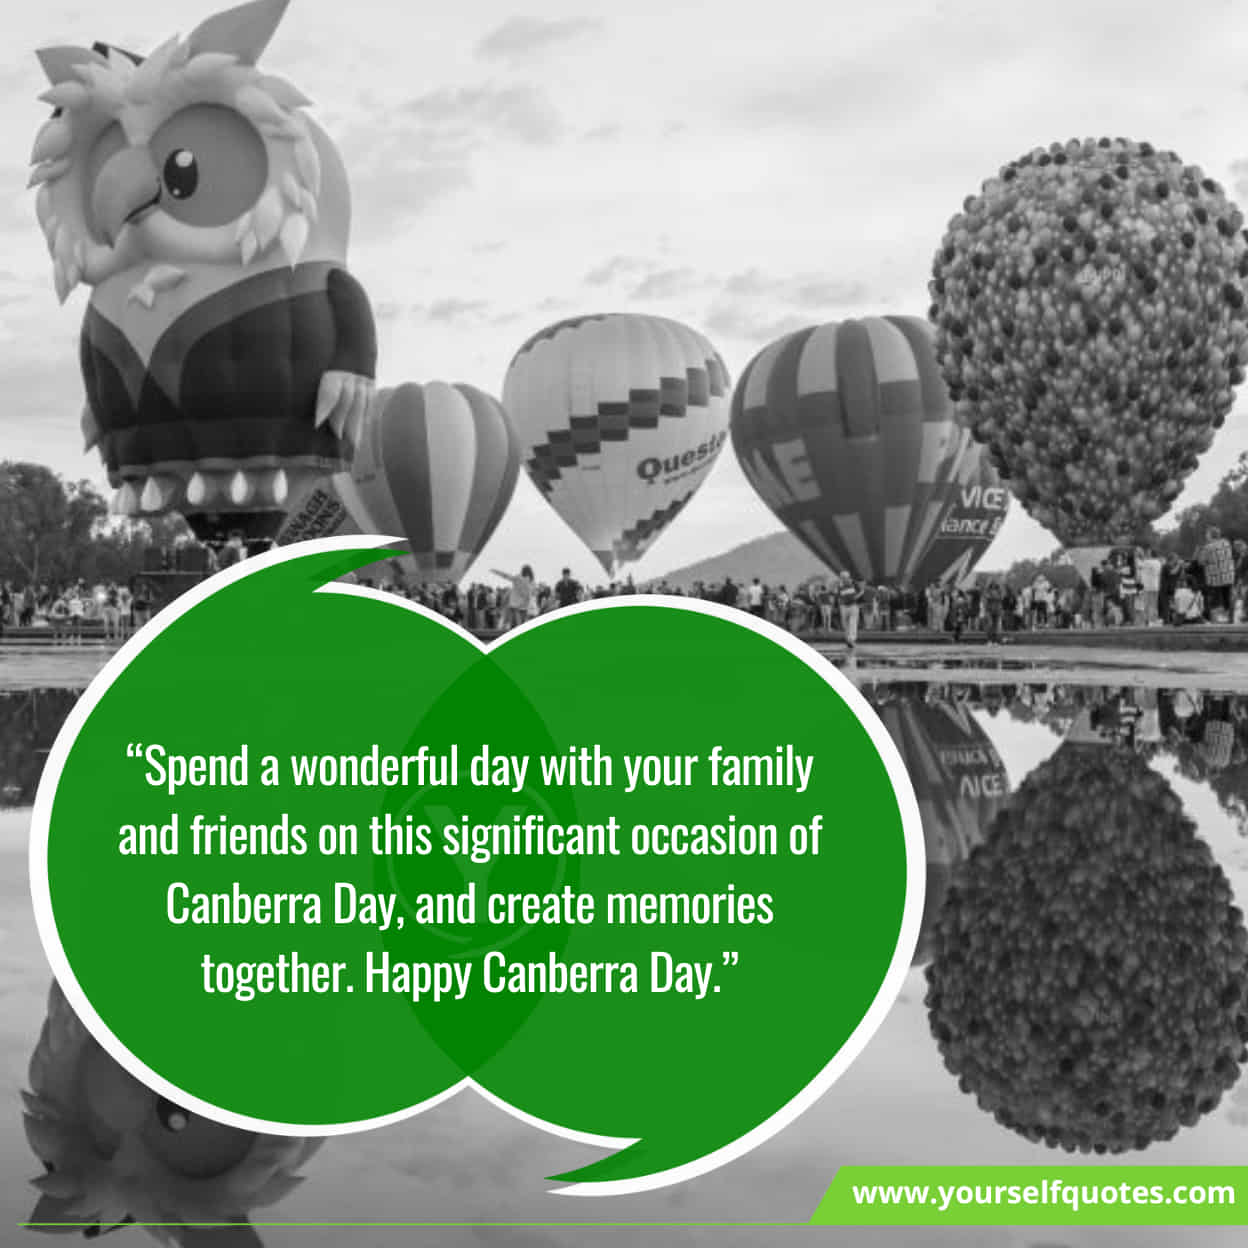 Happy Canberra Day Slogans & Sayings